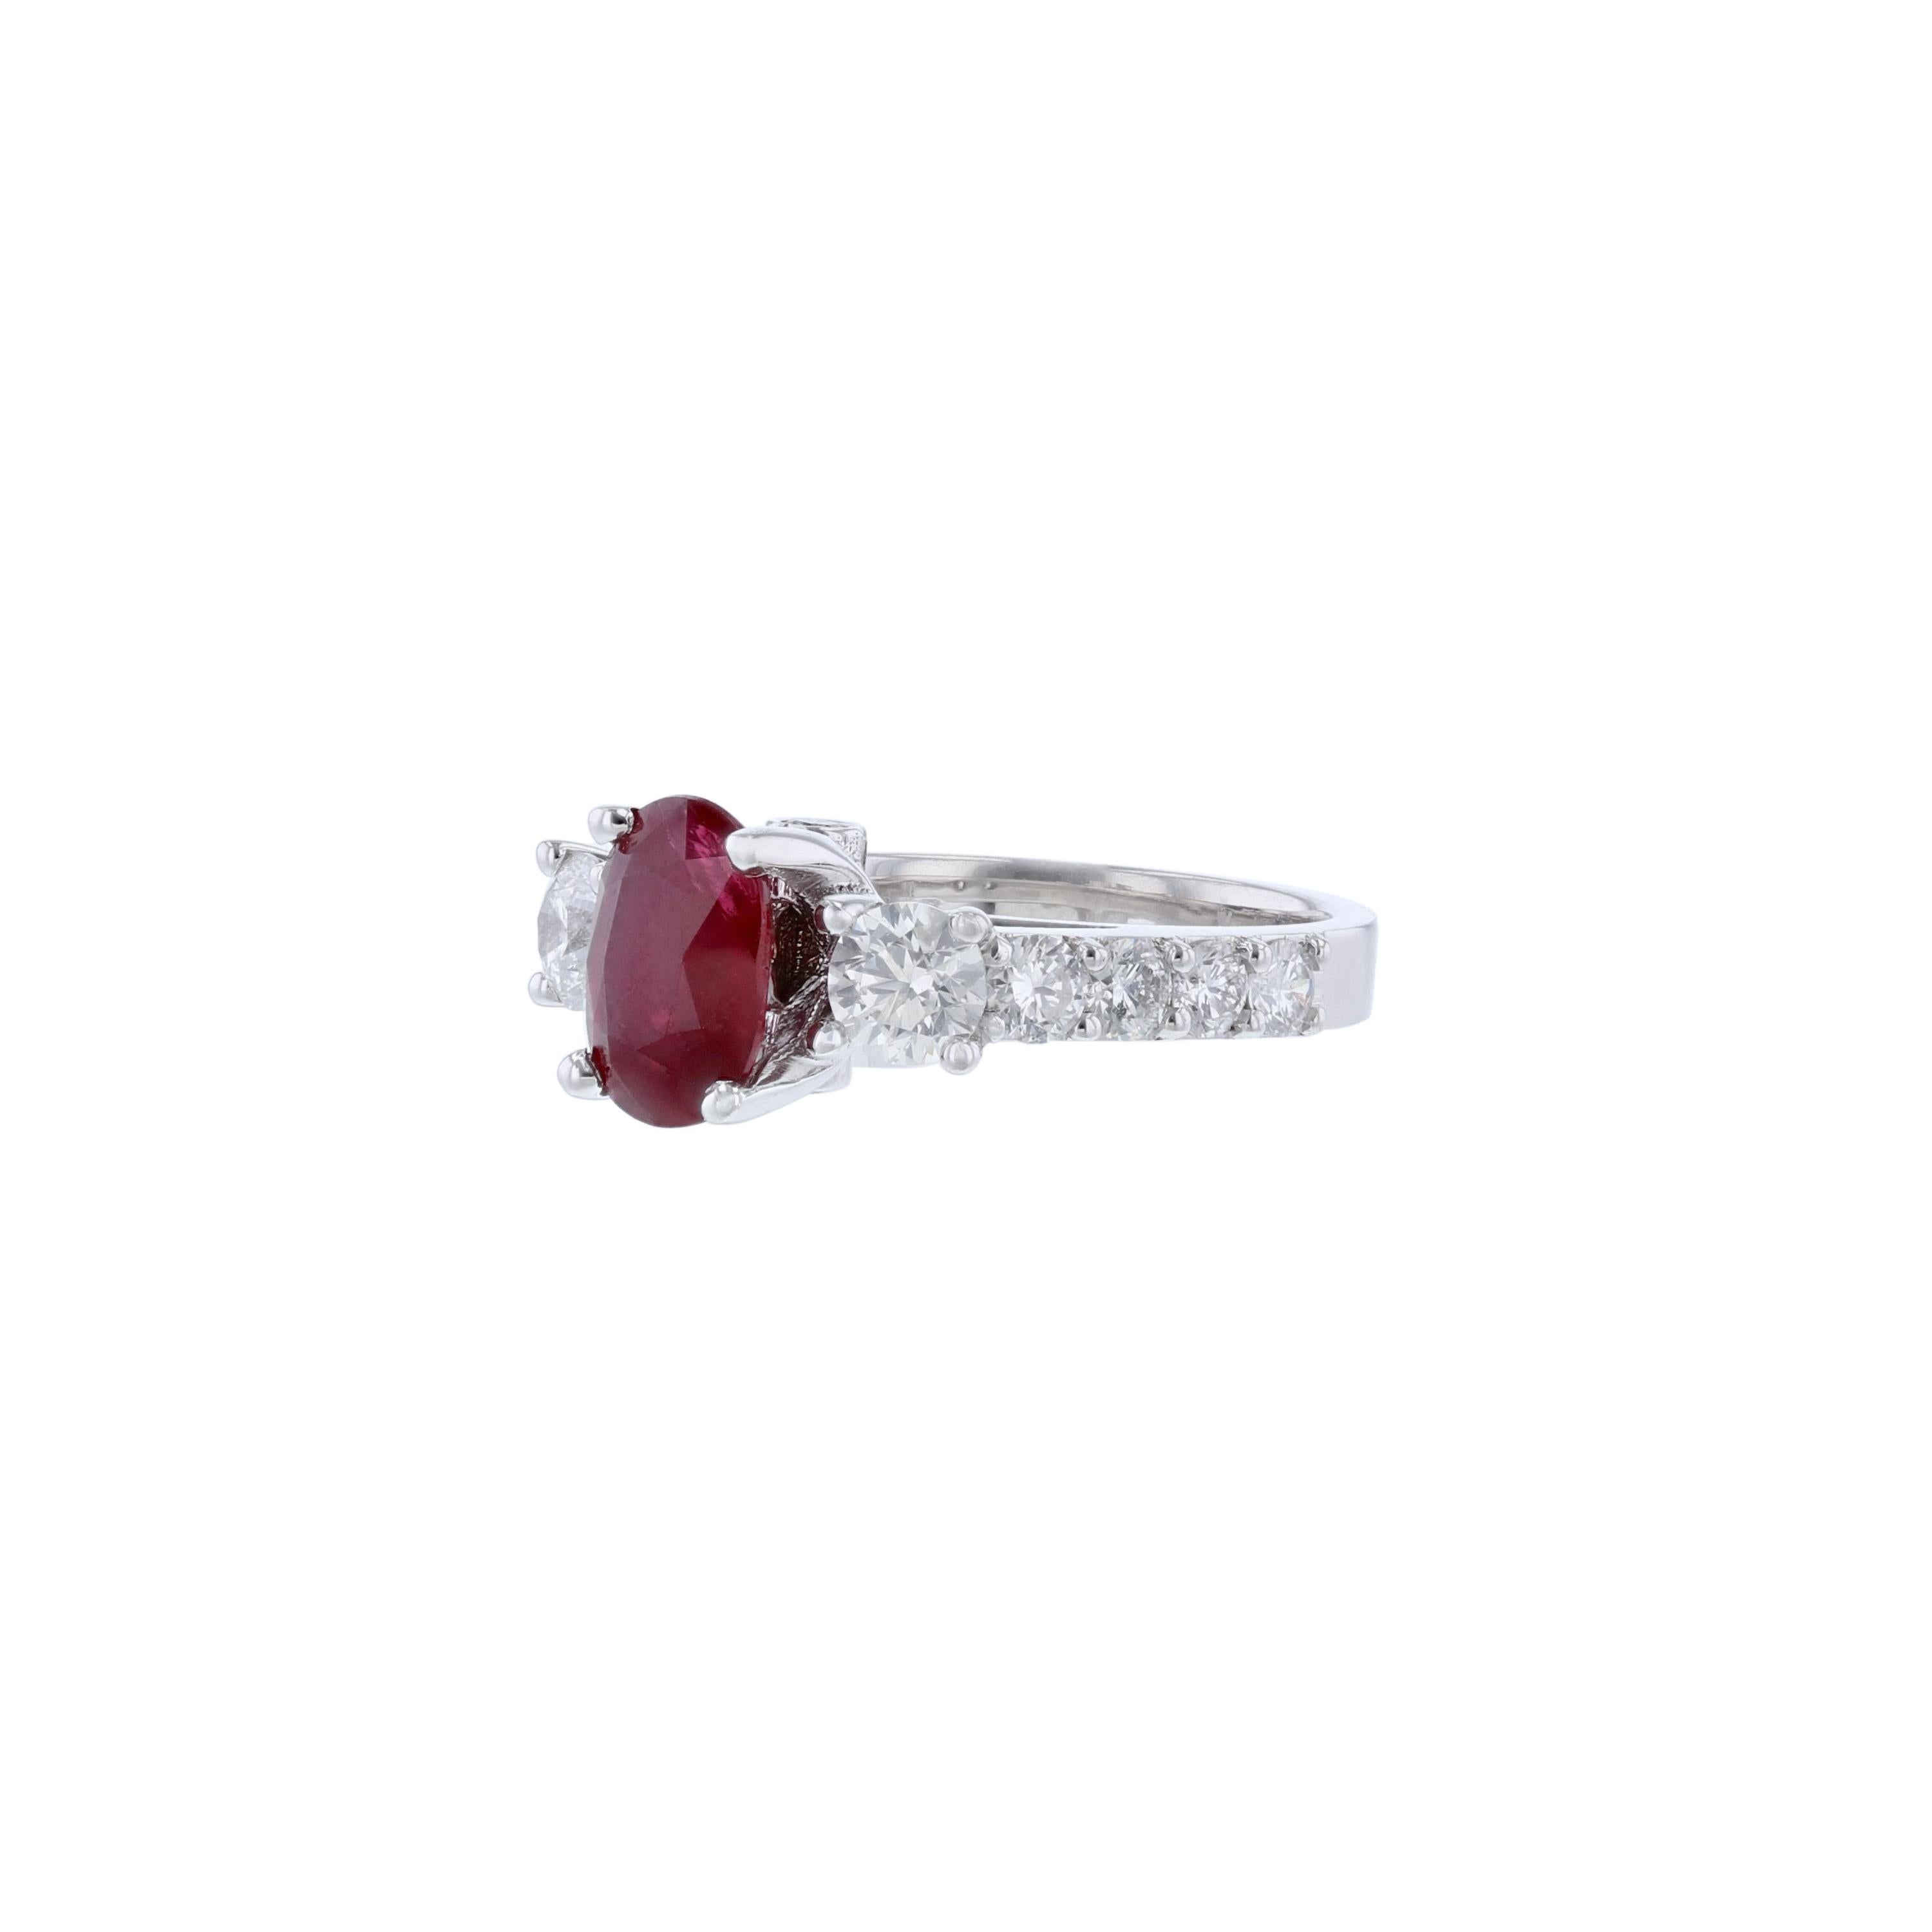 This ring is made in 14K white gold ring and features 1 oval shape natural corundum (no heat) ruby weighing 1.46 carats. As well as 12 round cut diamonds weighing 0.55 carat. With a color grade (H) and clarity grade (SI2)